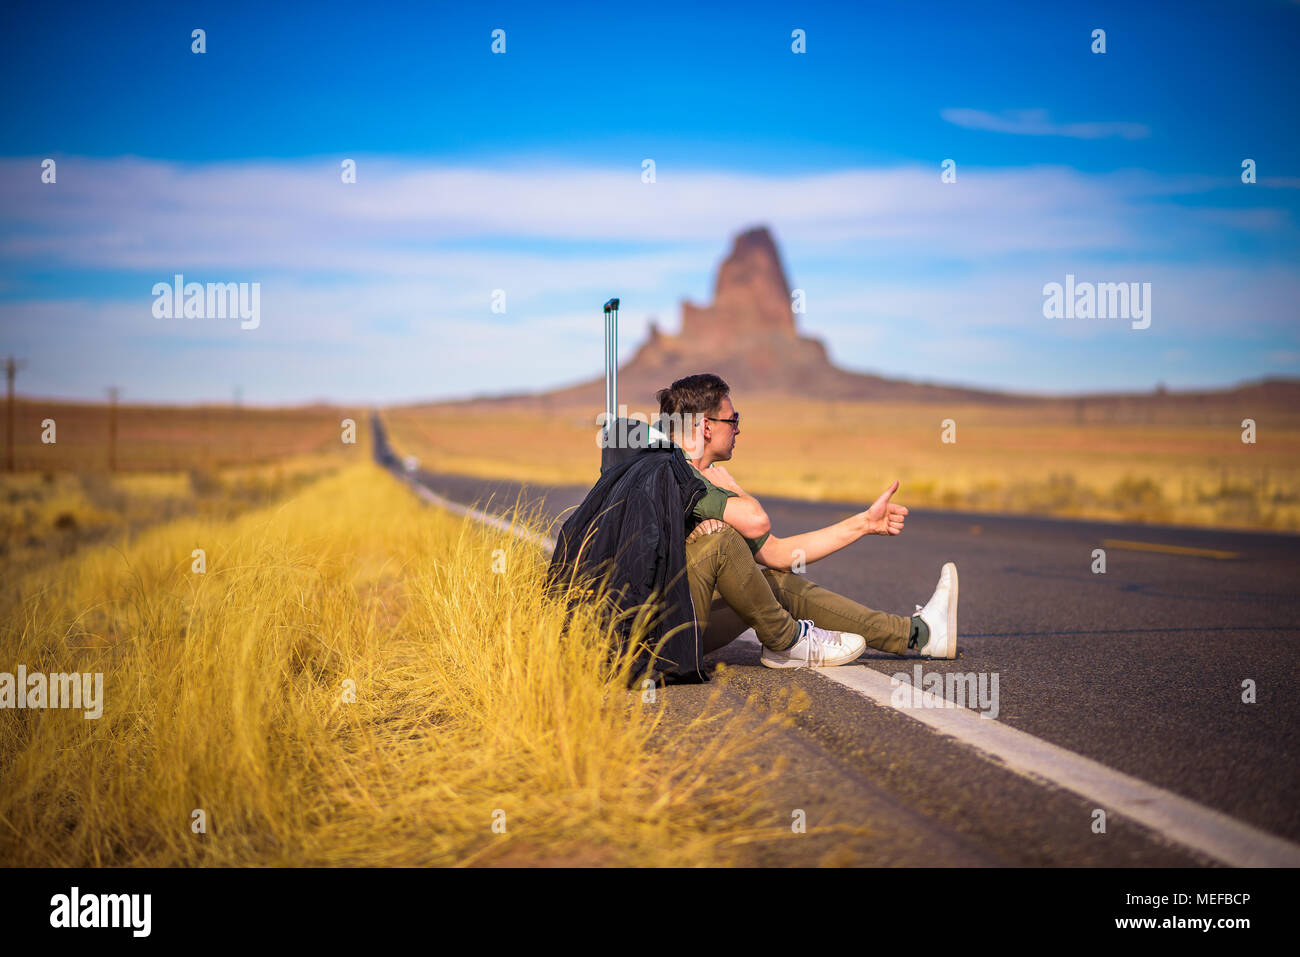 Tired hitch-hiker with suitcase sitting on a road Stock Photo